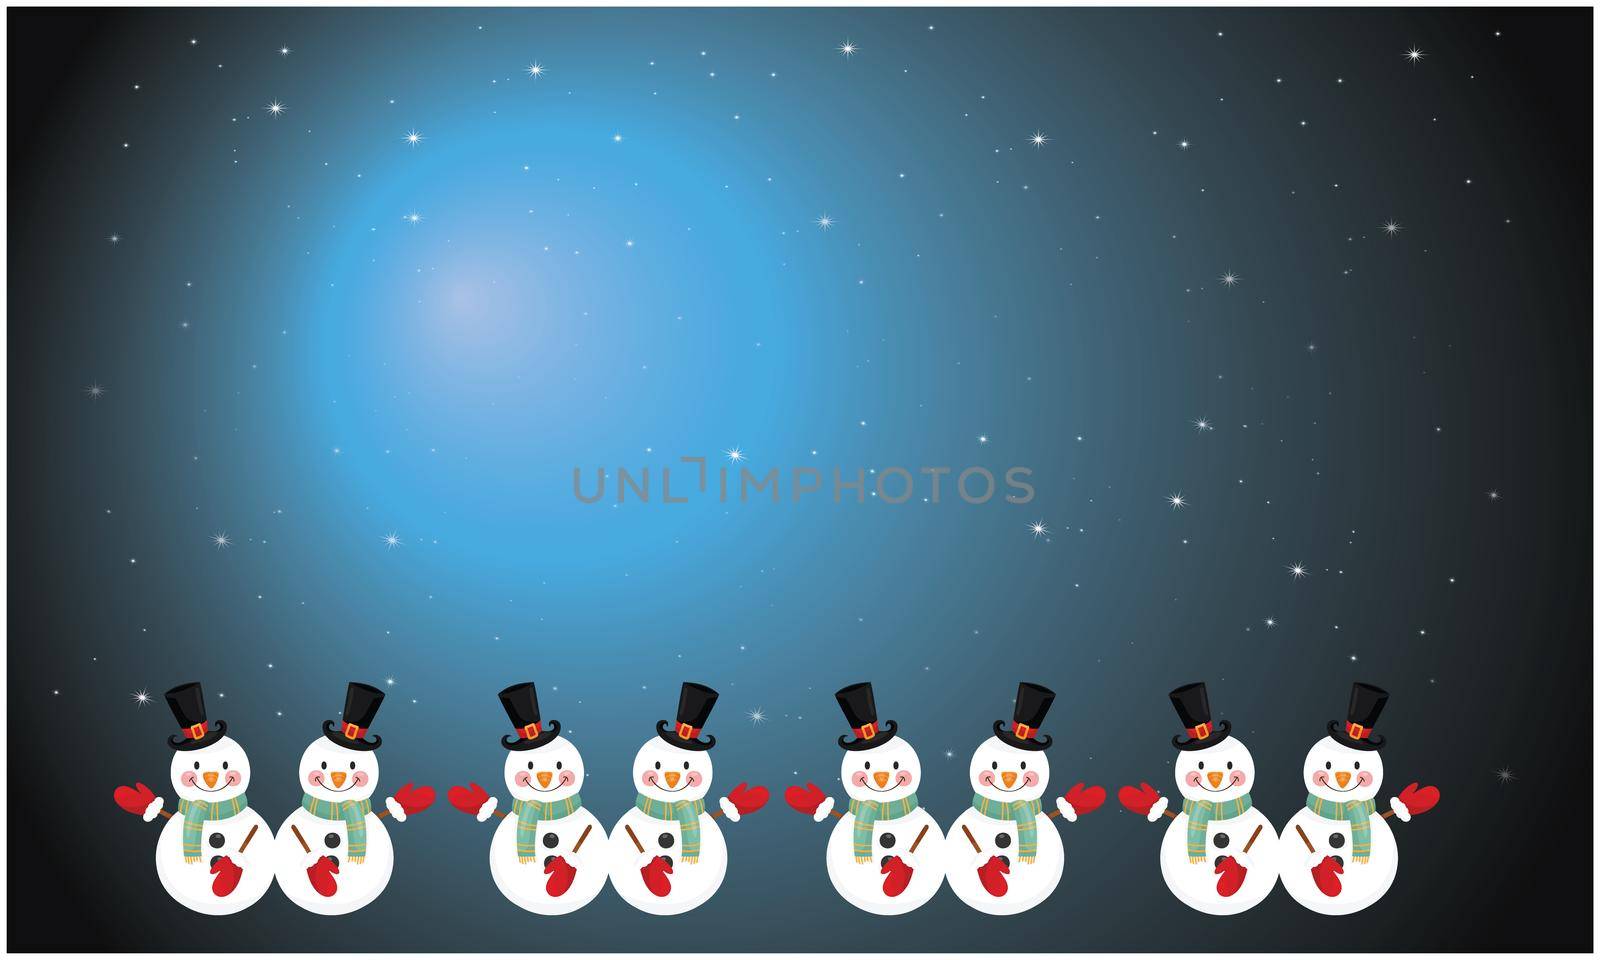 several snowman in an abstract moon night background